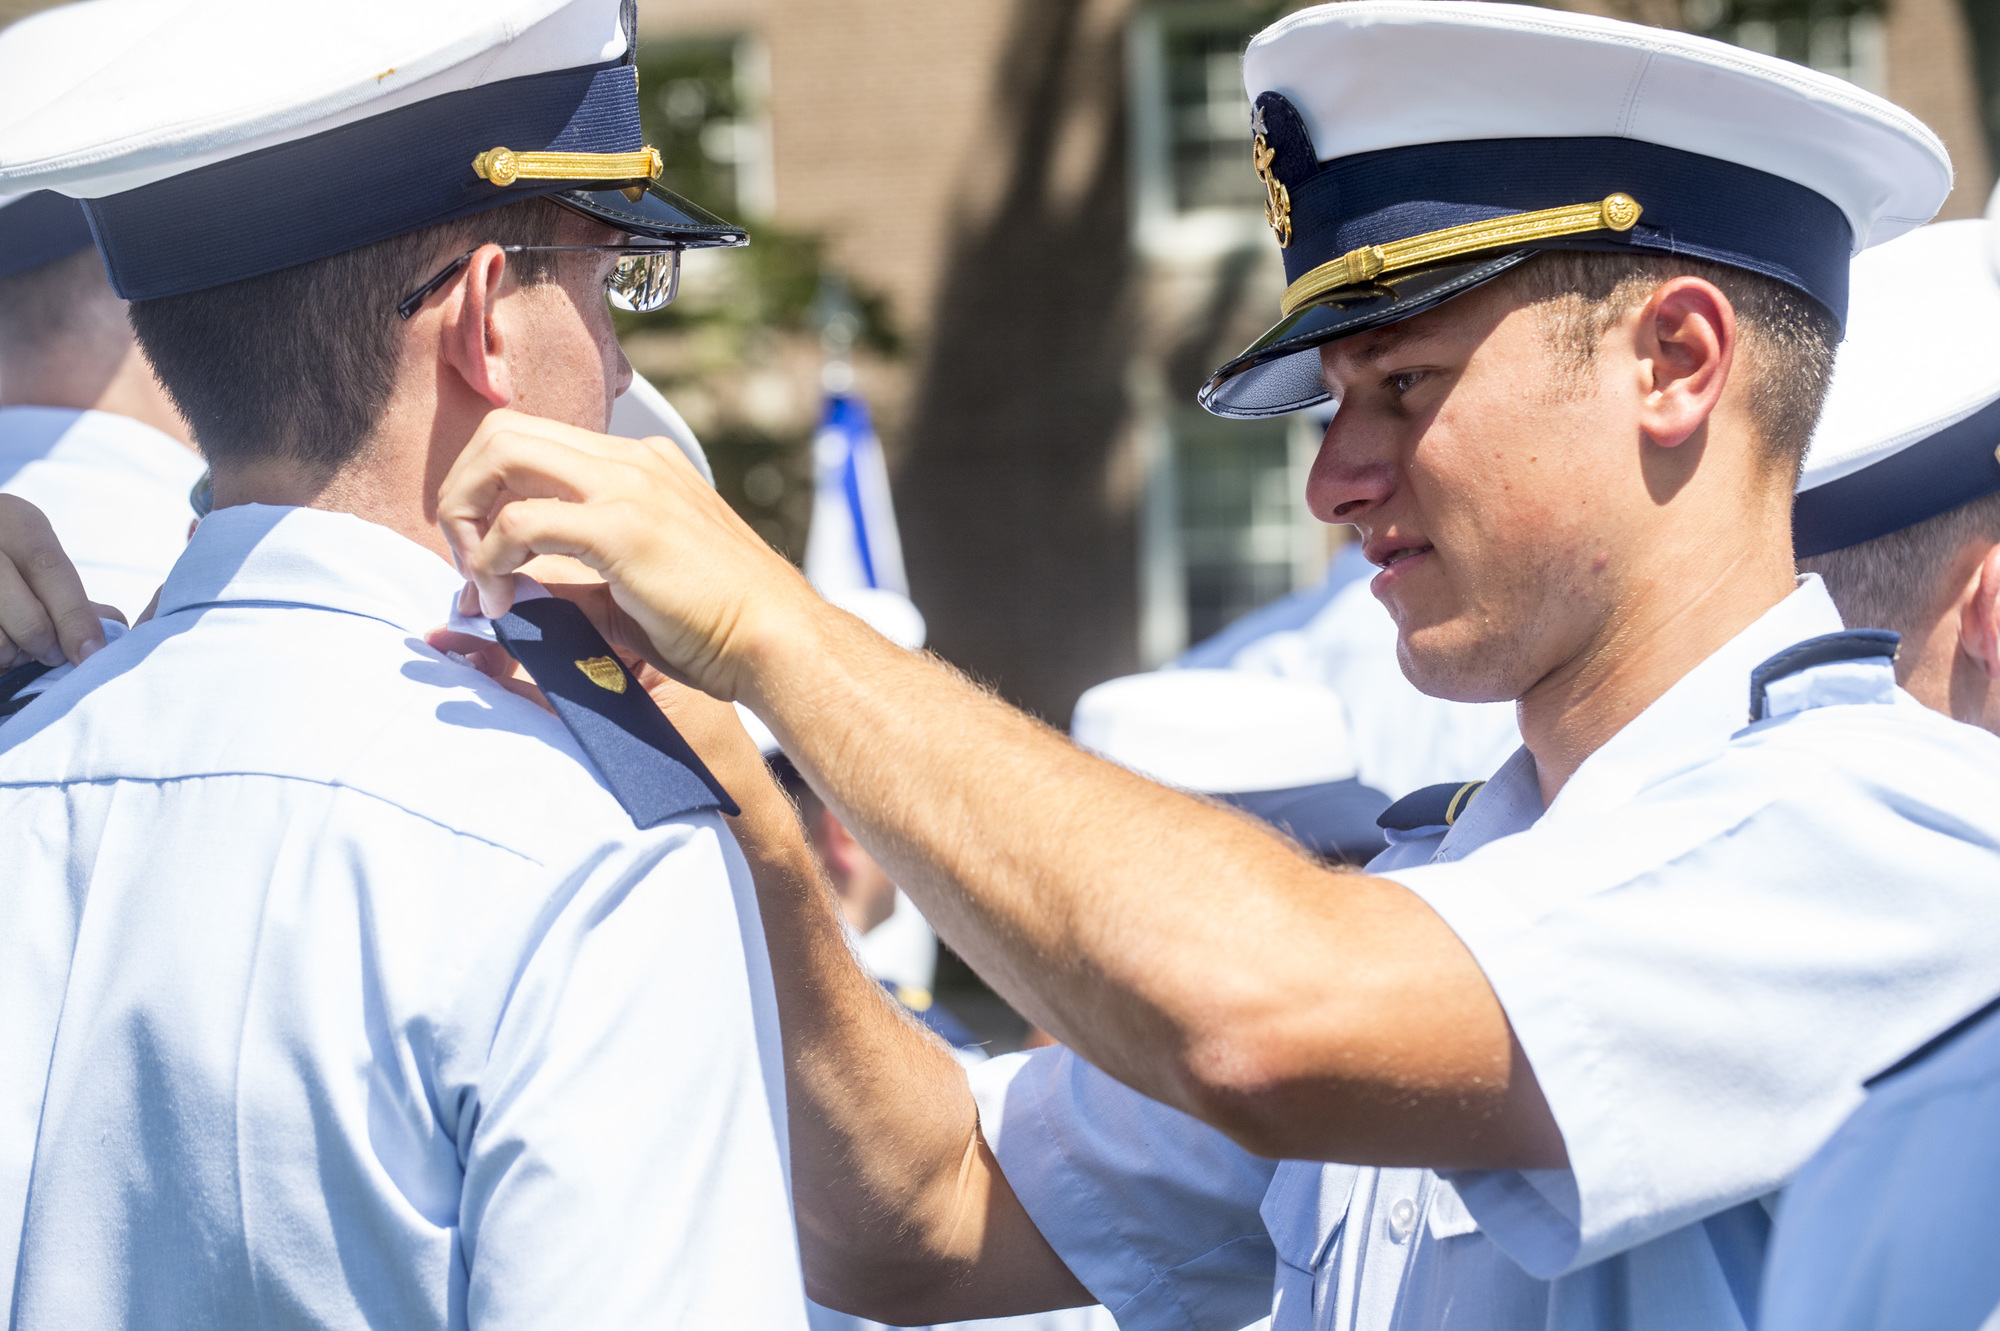 U.S. Coast Guard Academy Class of 2020 cadets received their shoulder boards in a ceremony, Aug 15, 2016. 